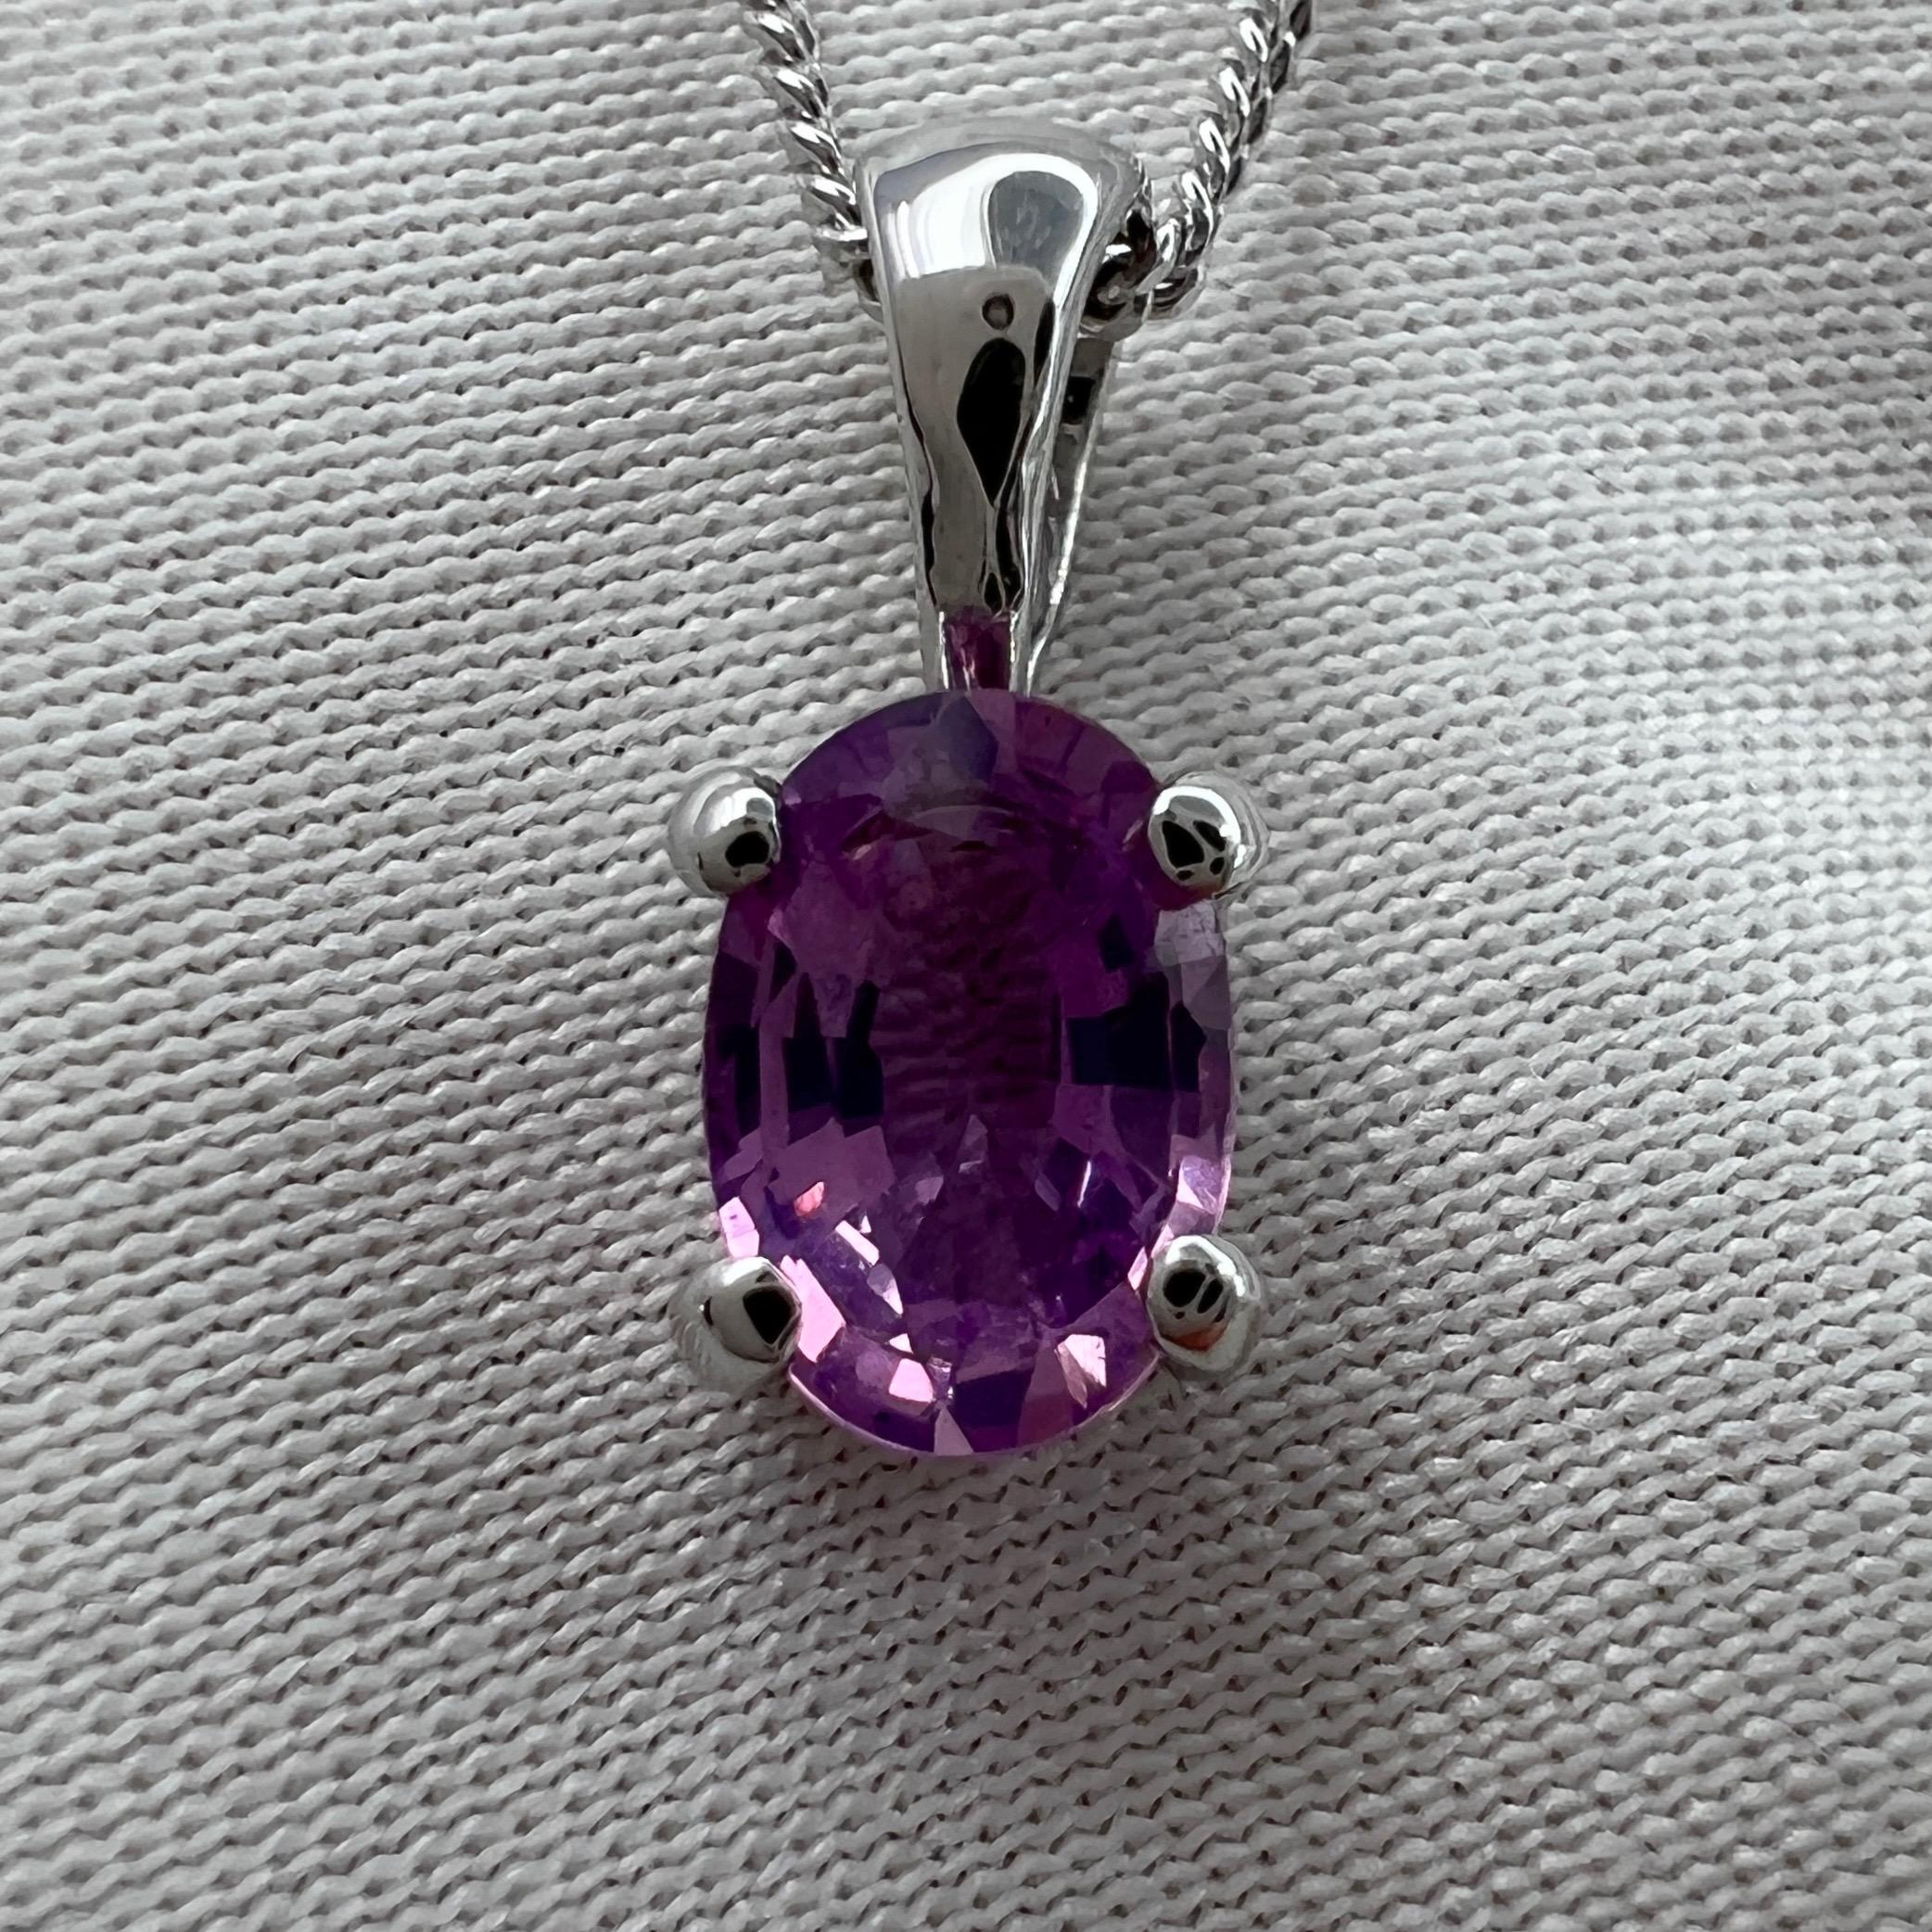 Natural Pink Purple Ceylon Sapphire 18k White Gold Oval Cut Solitaire Pendant Necklace.

0.70 carat sapphire with a vivid purplish pink colour and excellent clarity, very clean stone.
Also has an excellent oval cut, set in a fine 18k white gold